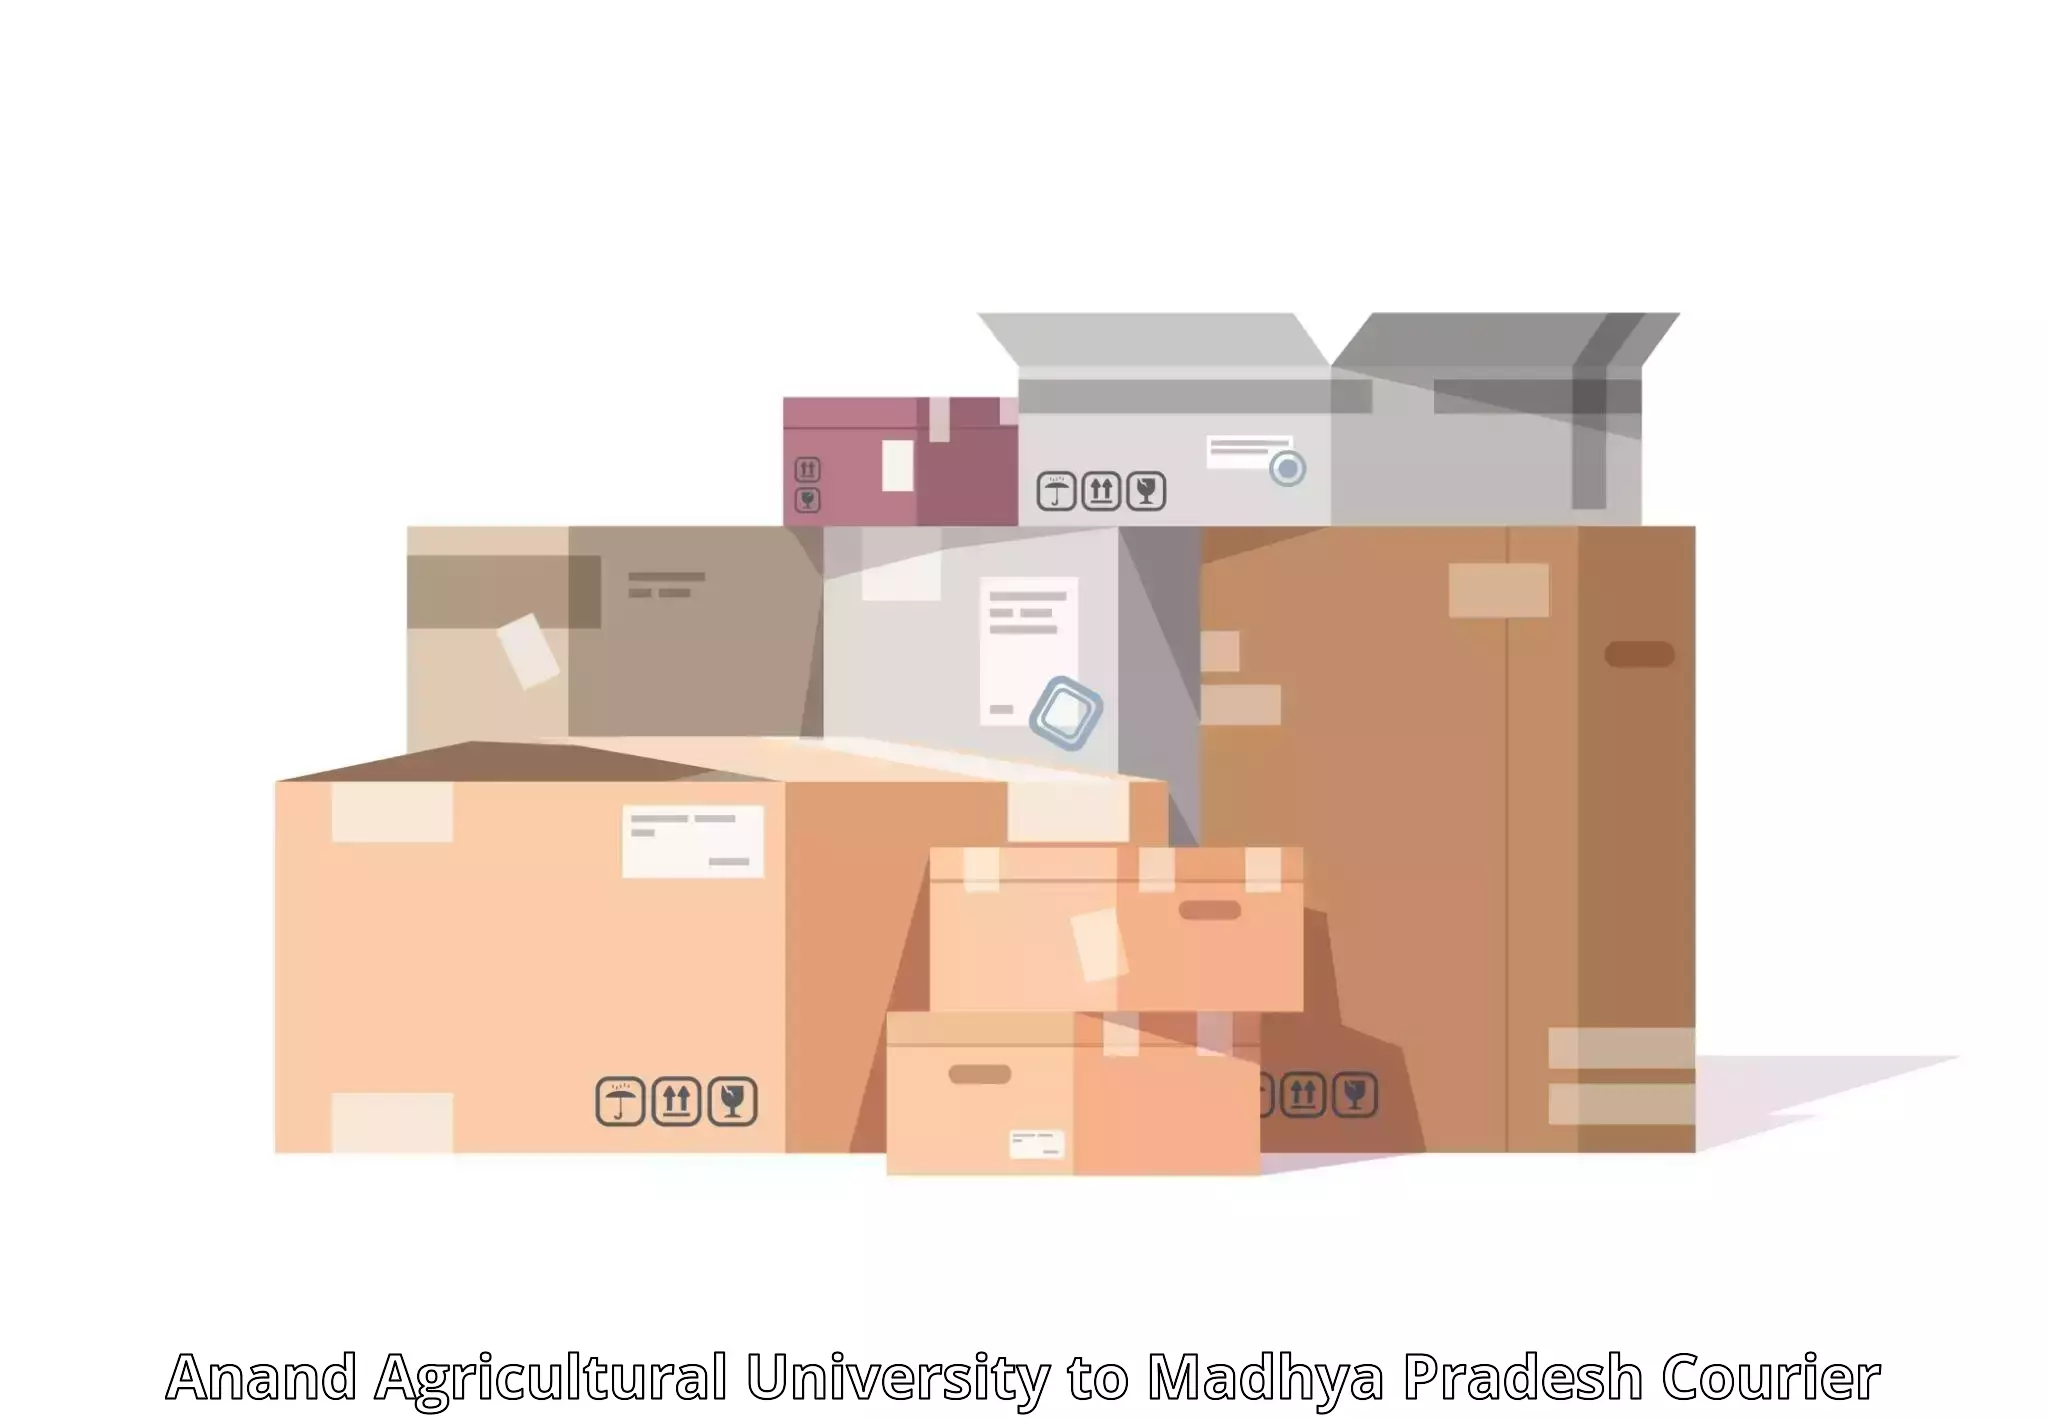 Efficient order fulfillment Anand Agricultural University to Khajuraho